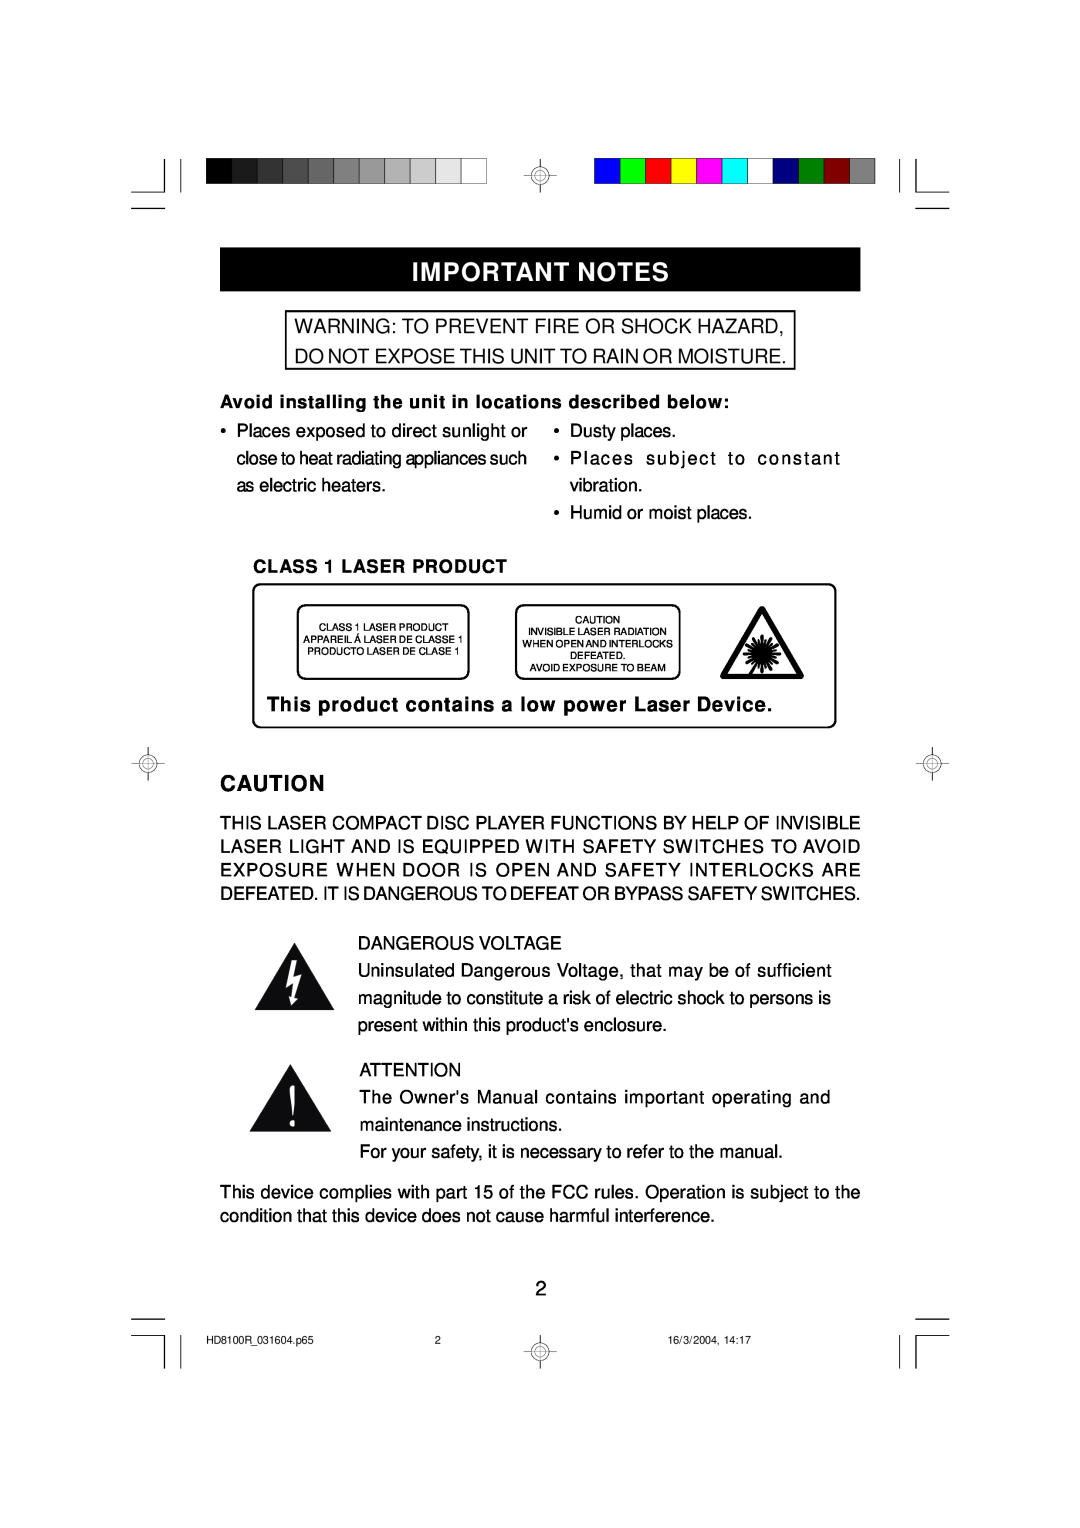 Emerson HD8100R owner manual Important Notes, This product contains a low power Laser Device 